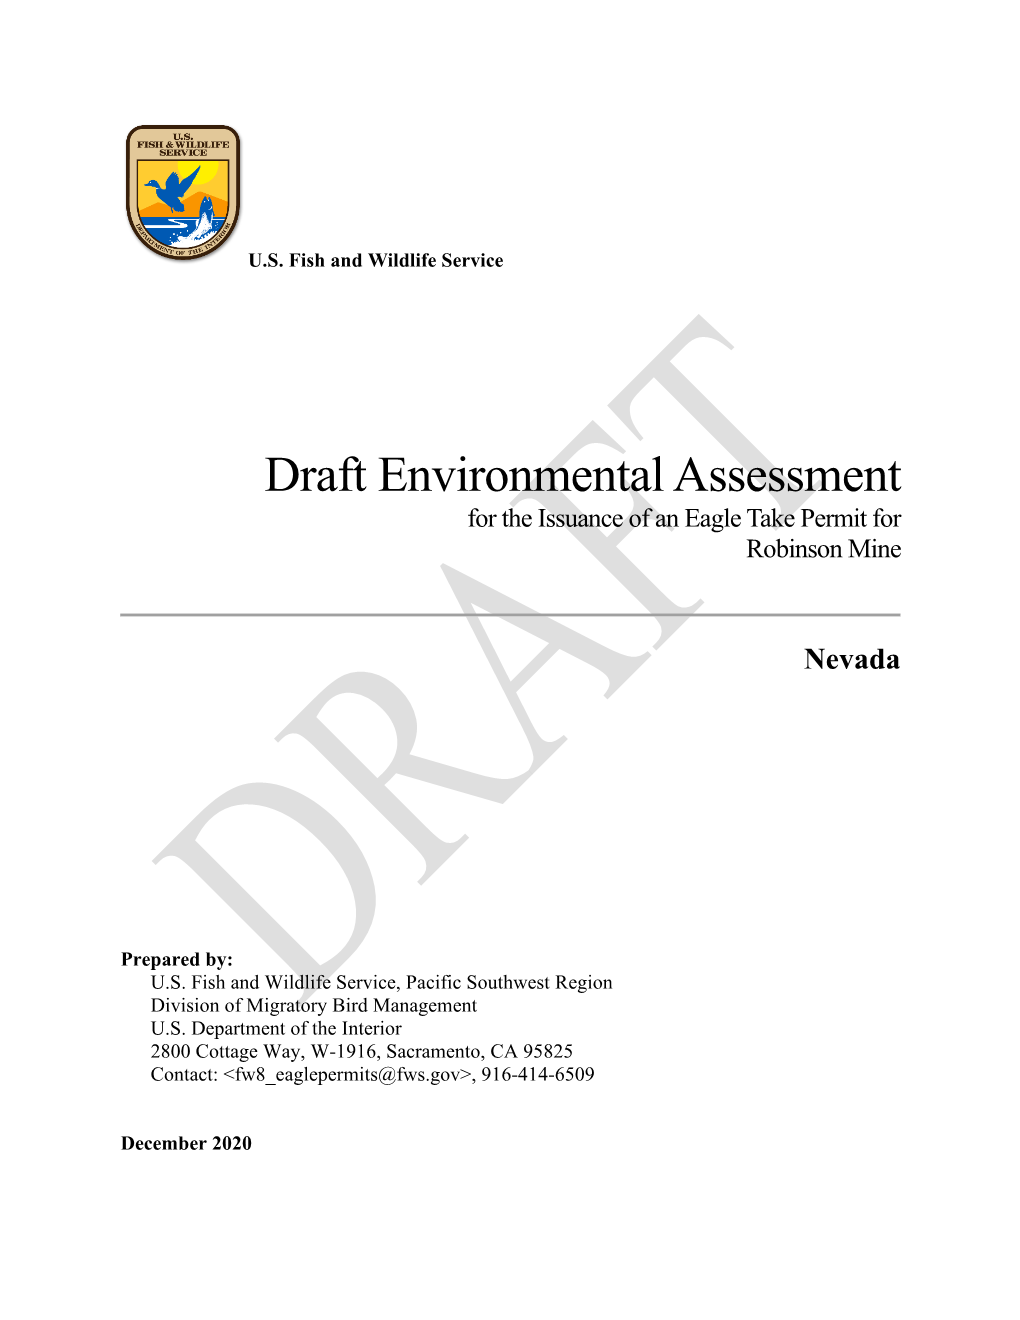 Draft Environmental Assessment for the Issuance of an Eagle Take Permit for Robinson Mine